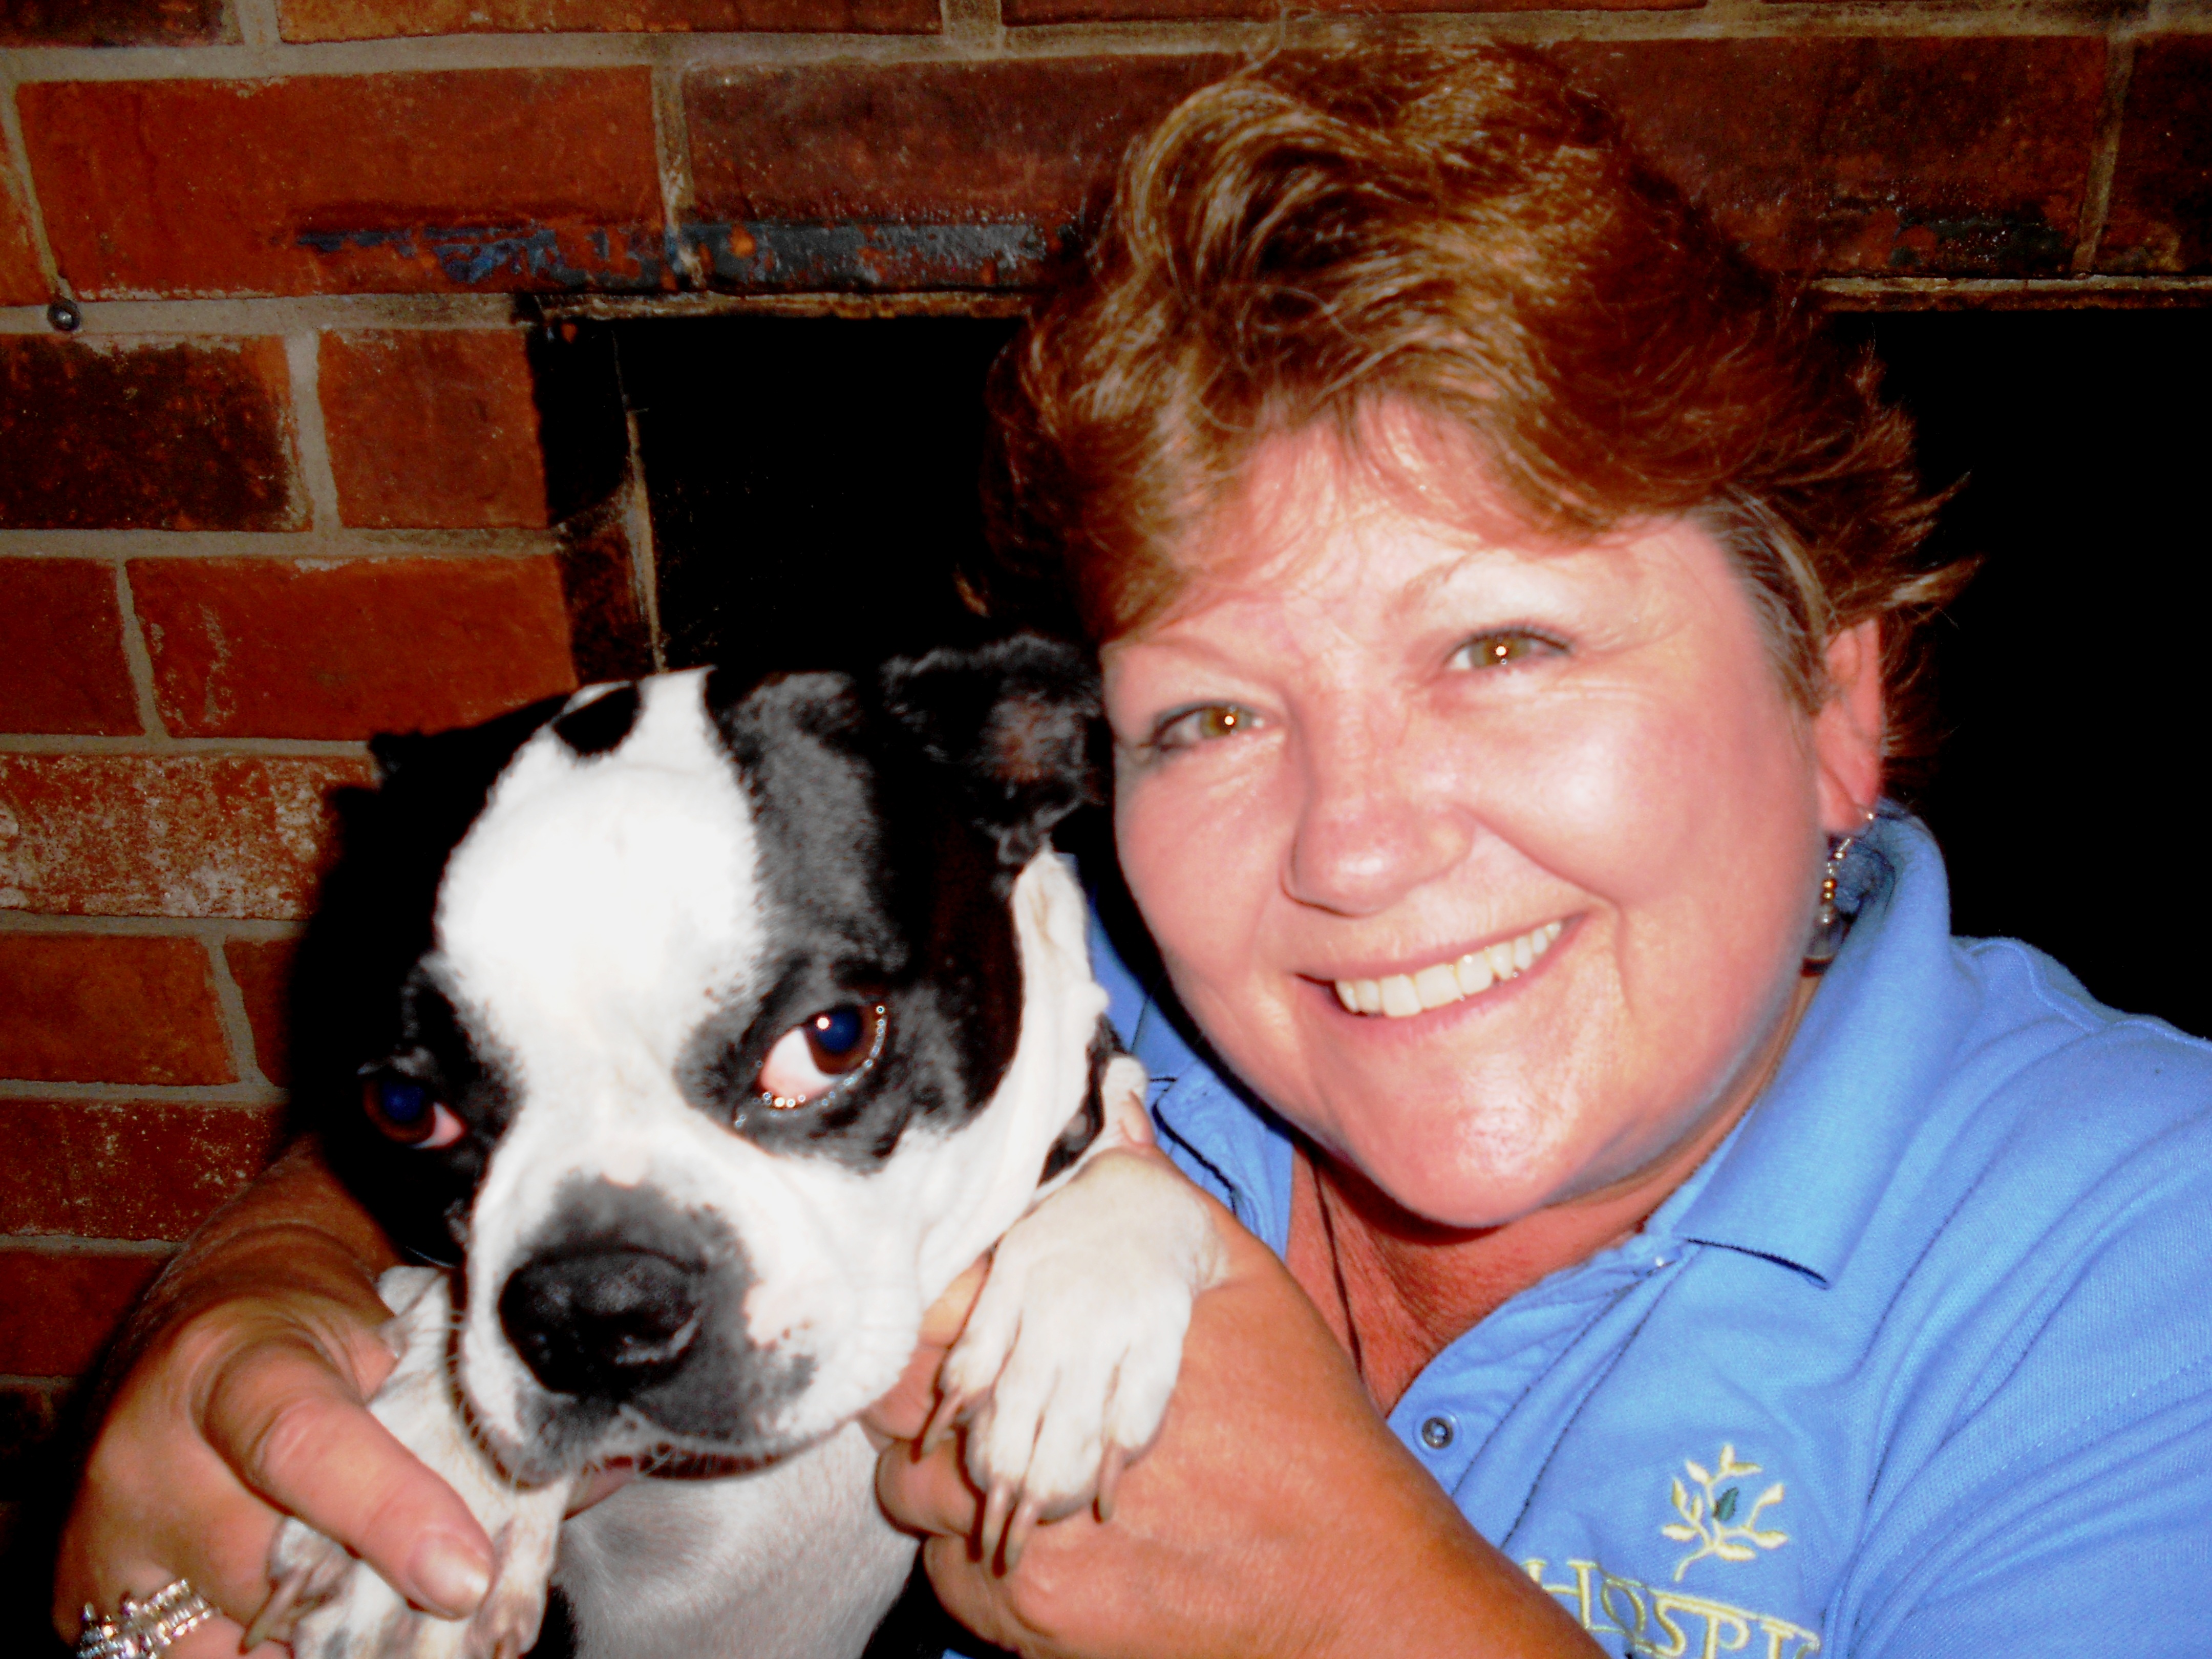 Nurse Colleen McCormick is now the proud mom of Maisy, whose owner died under Hospice Savannah's care.